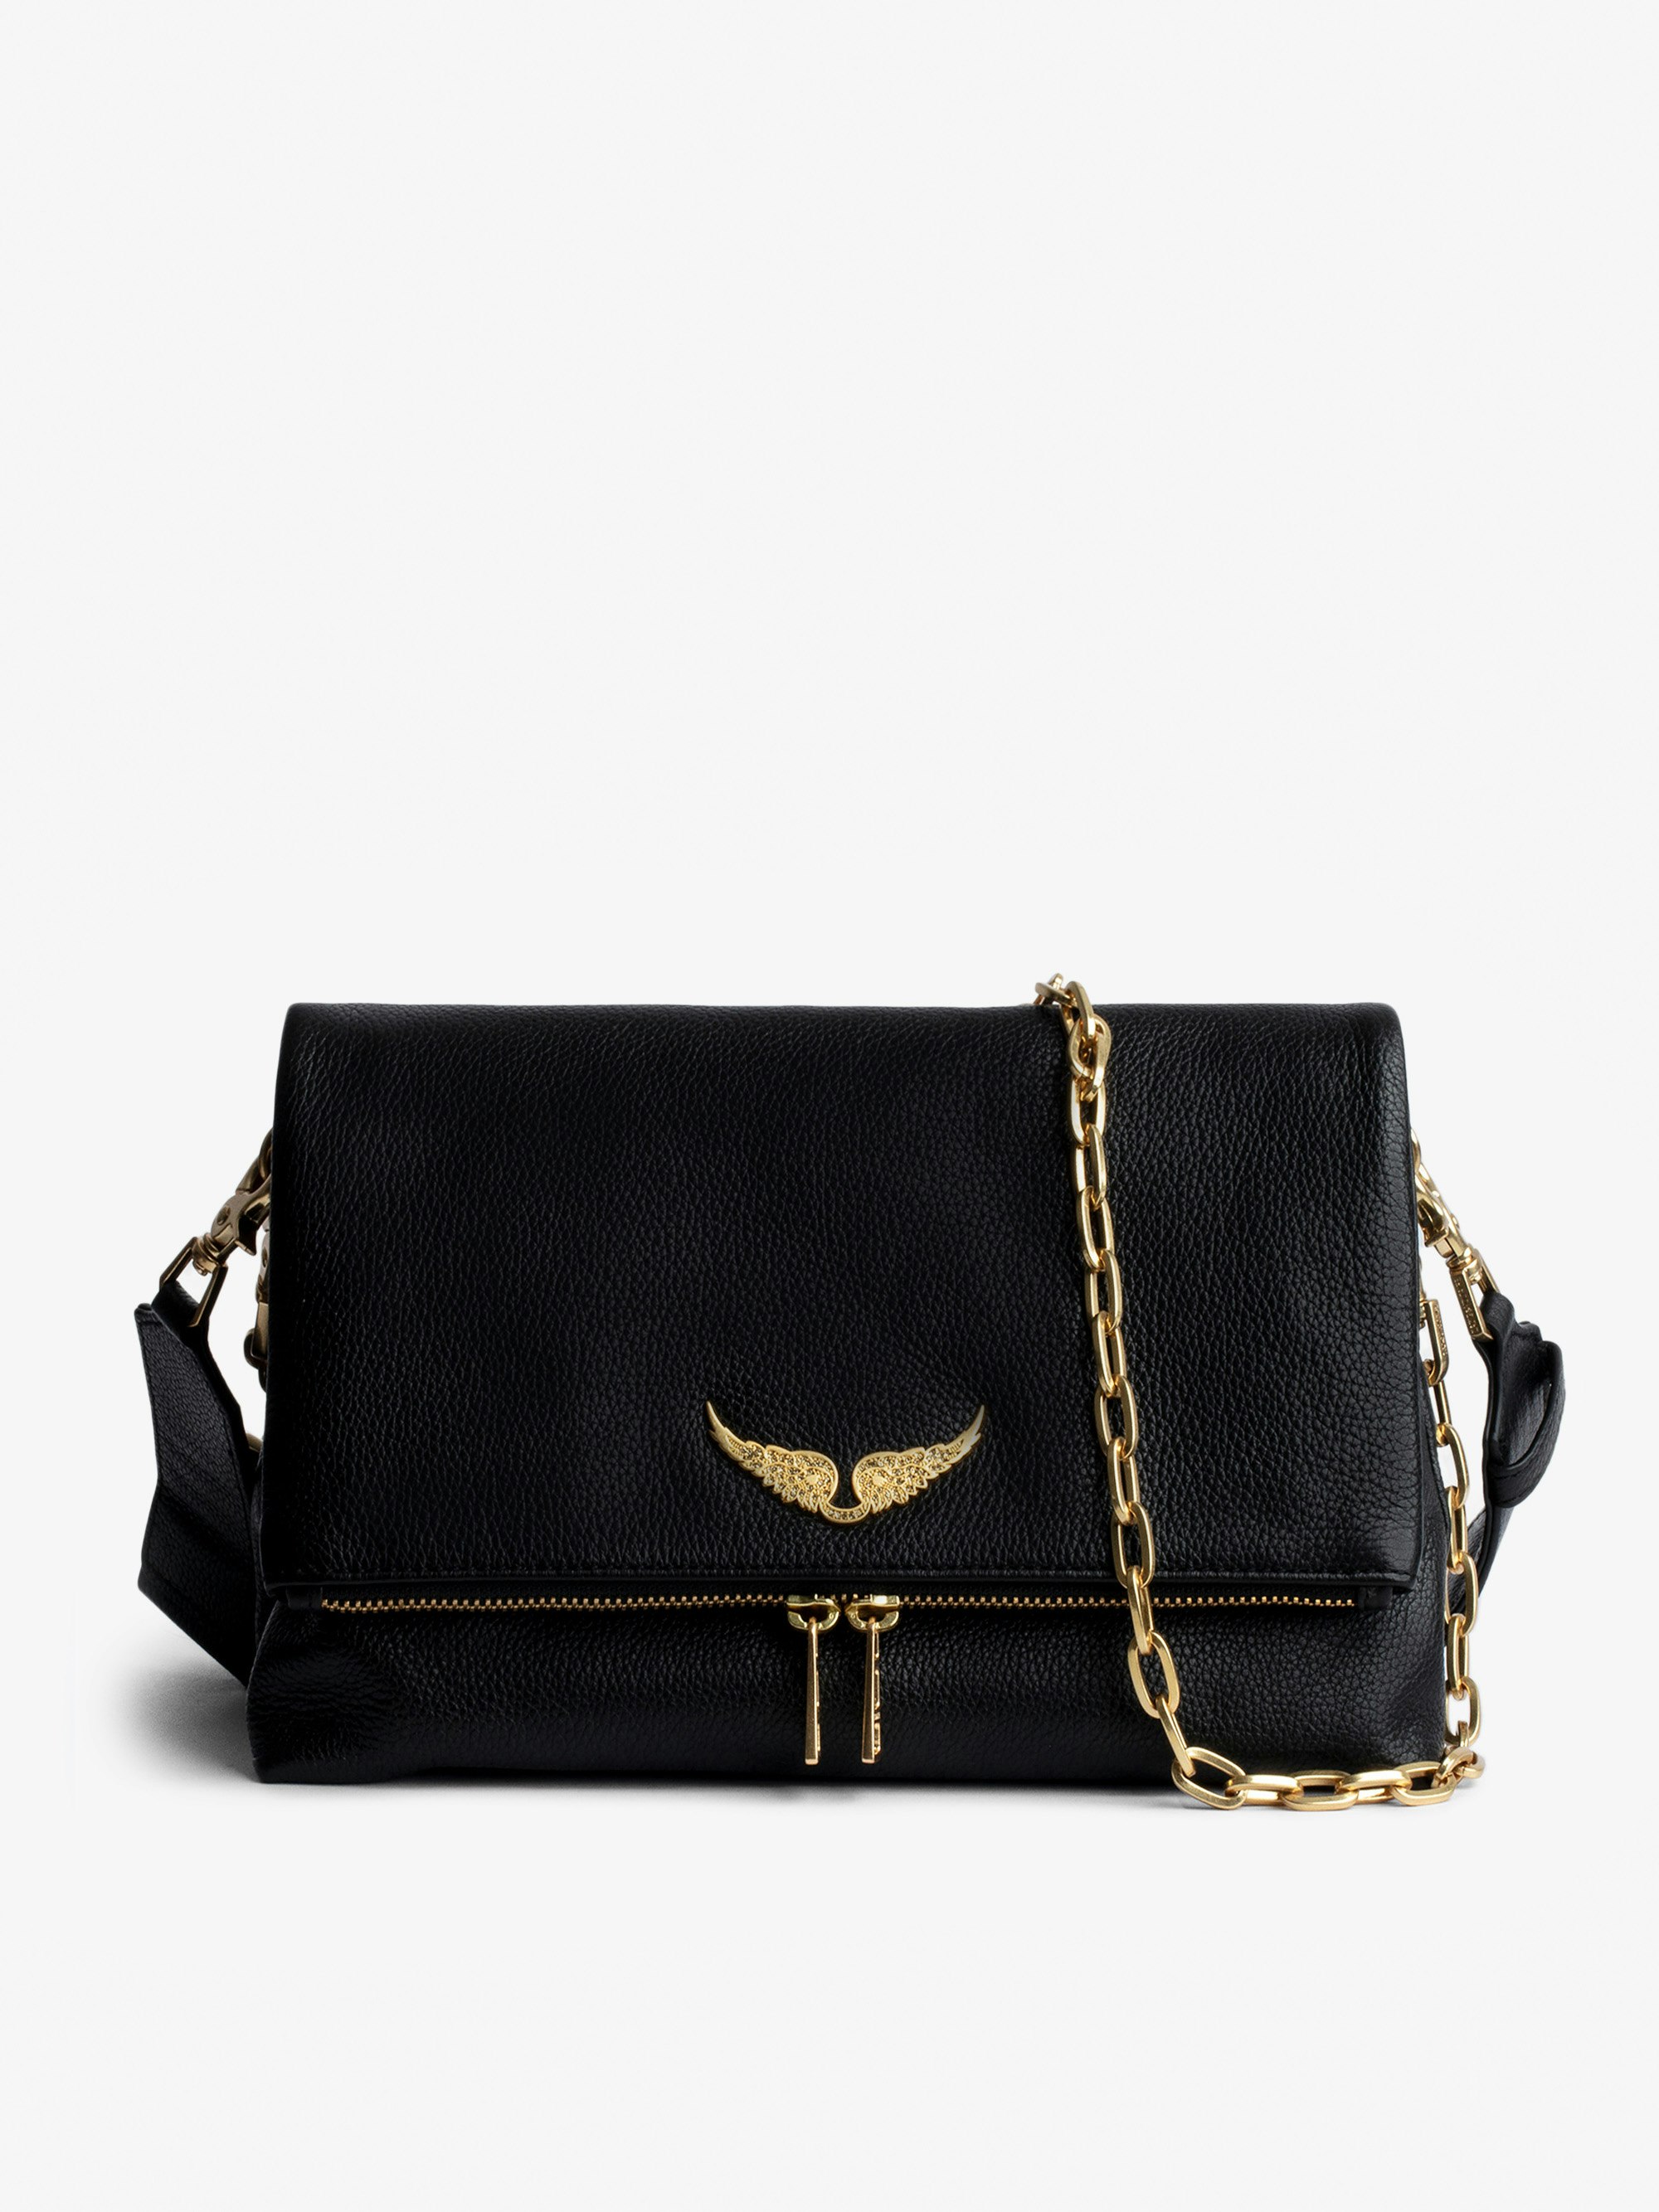 Rocky Bag - Women’s black grained leather bag with gold-toned chains and shoulder strap